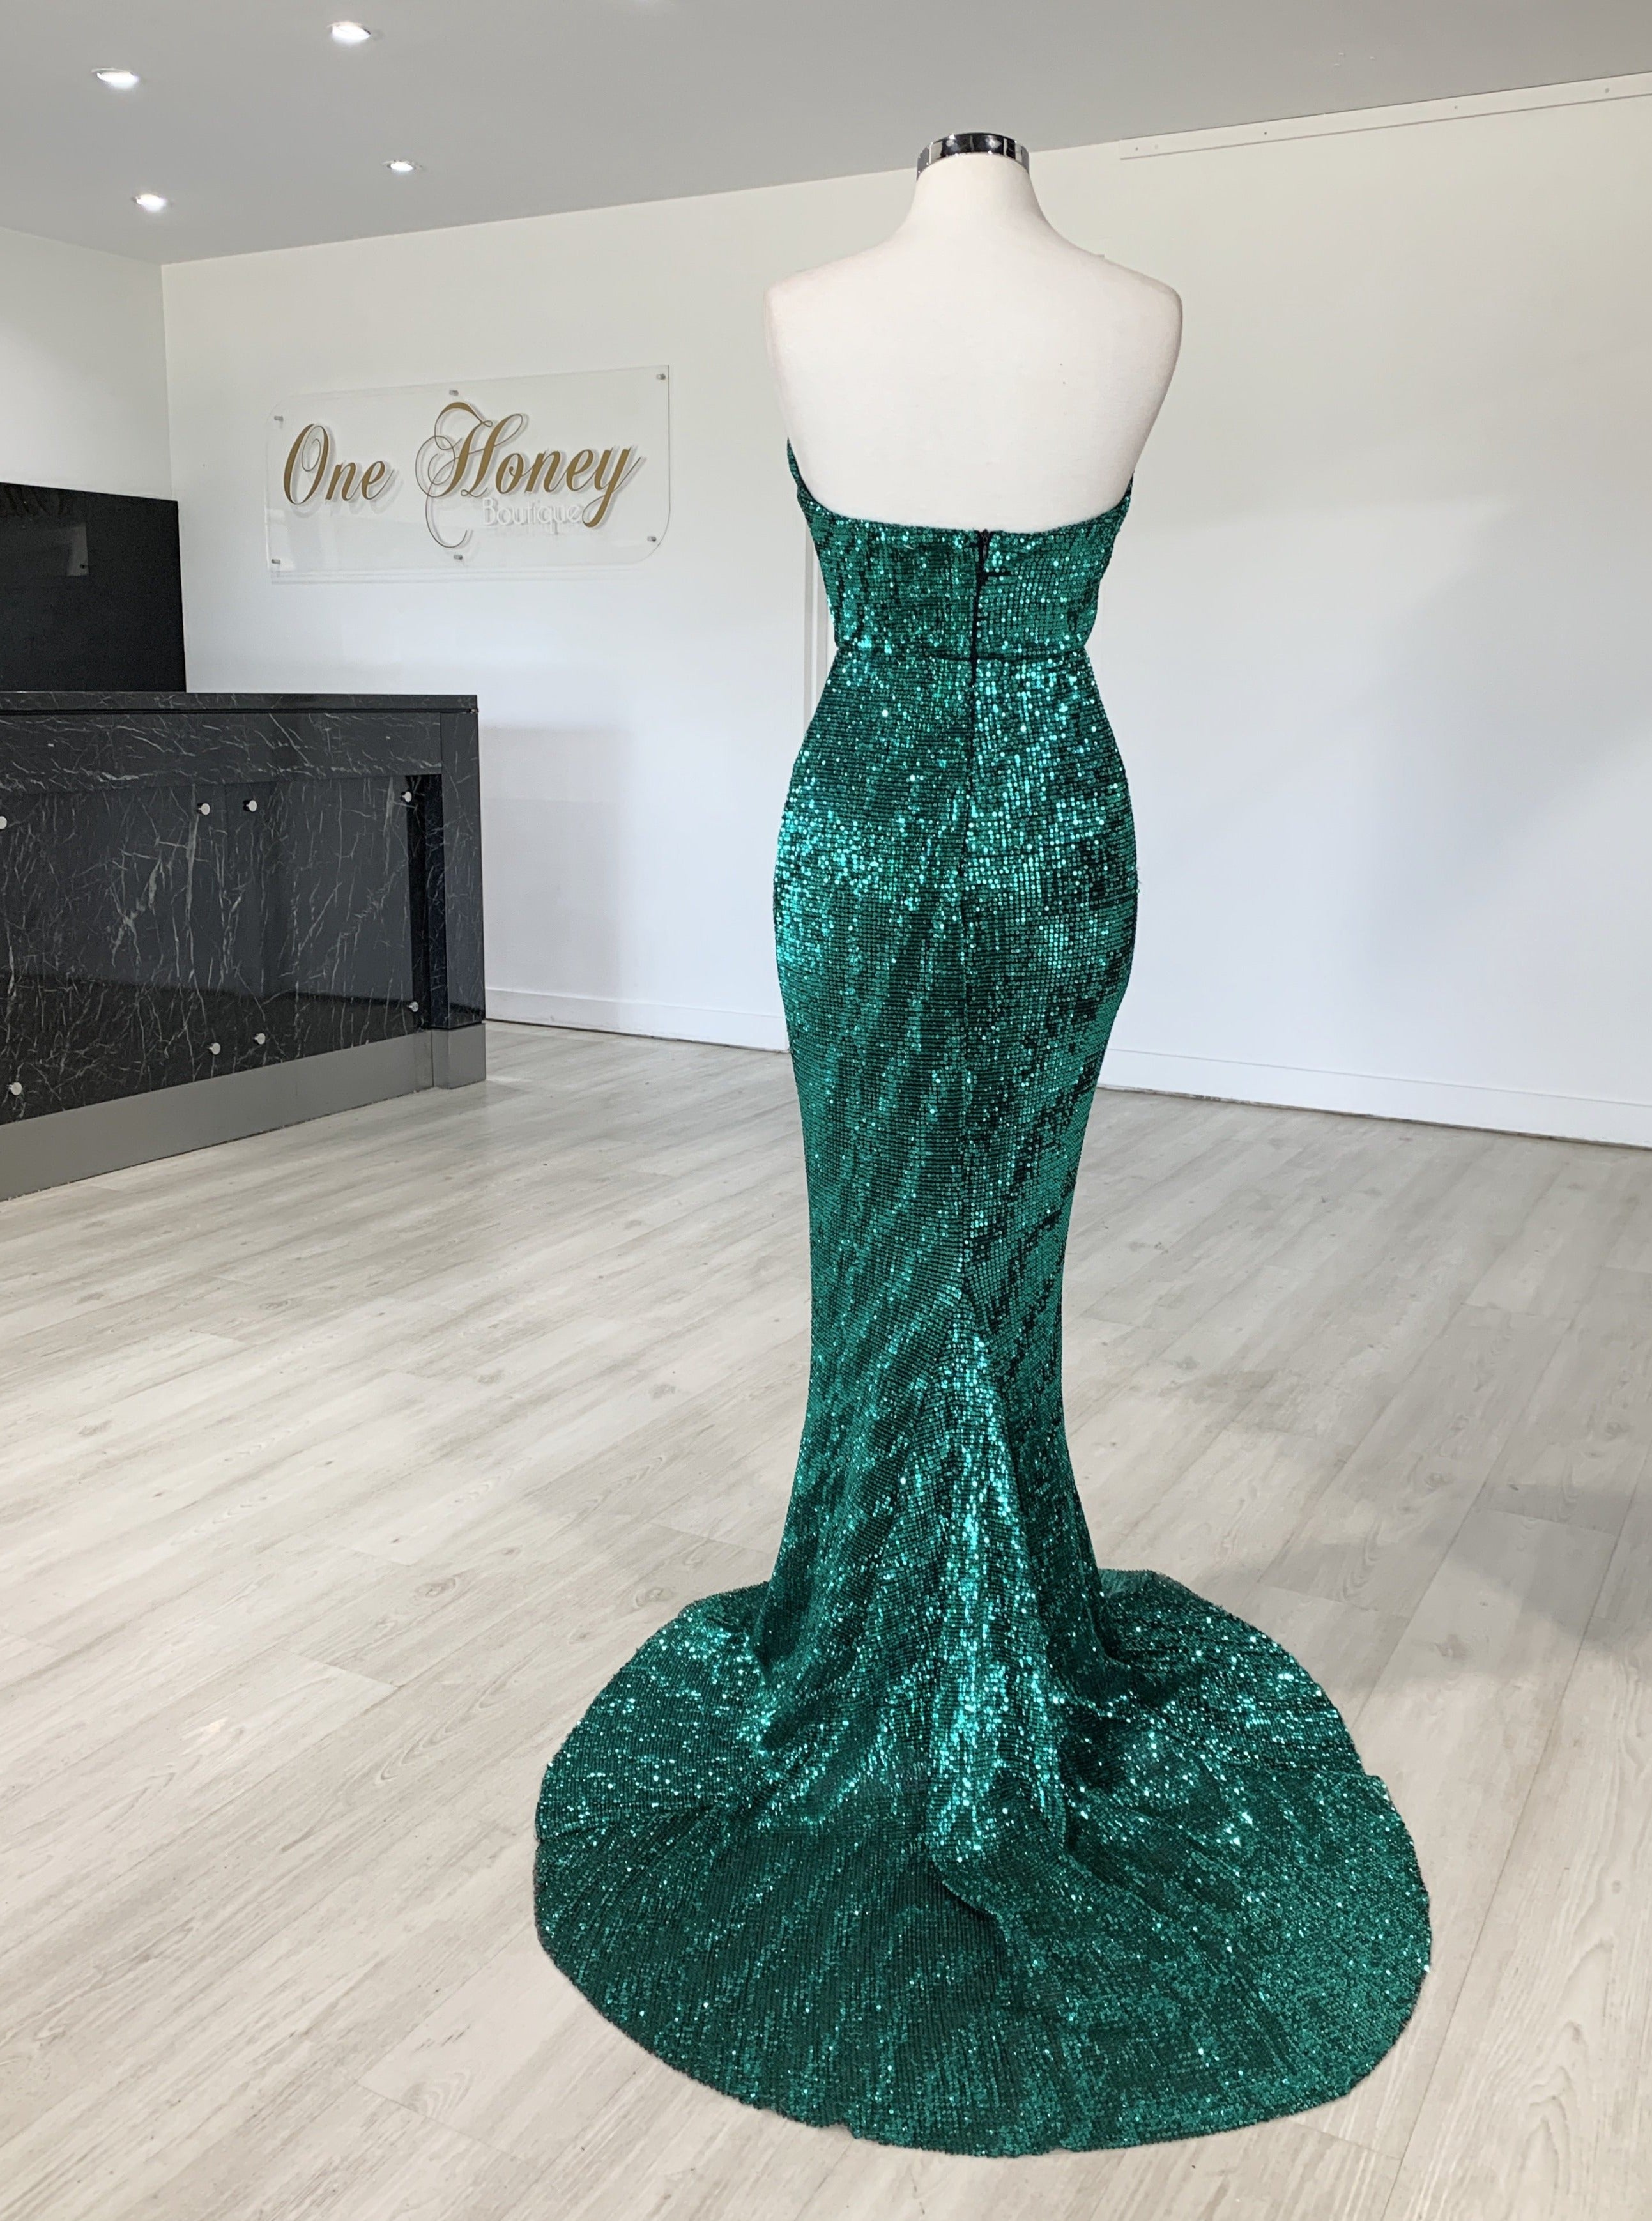 Honey Couture SONYA Emerald Green Strapless Sequin Evening Gown Dress {vendor} AfterPay Humm ZipPay LayBuy Sezzle